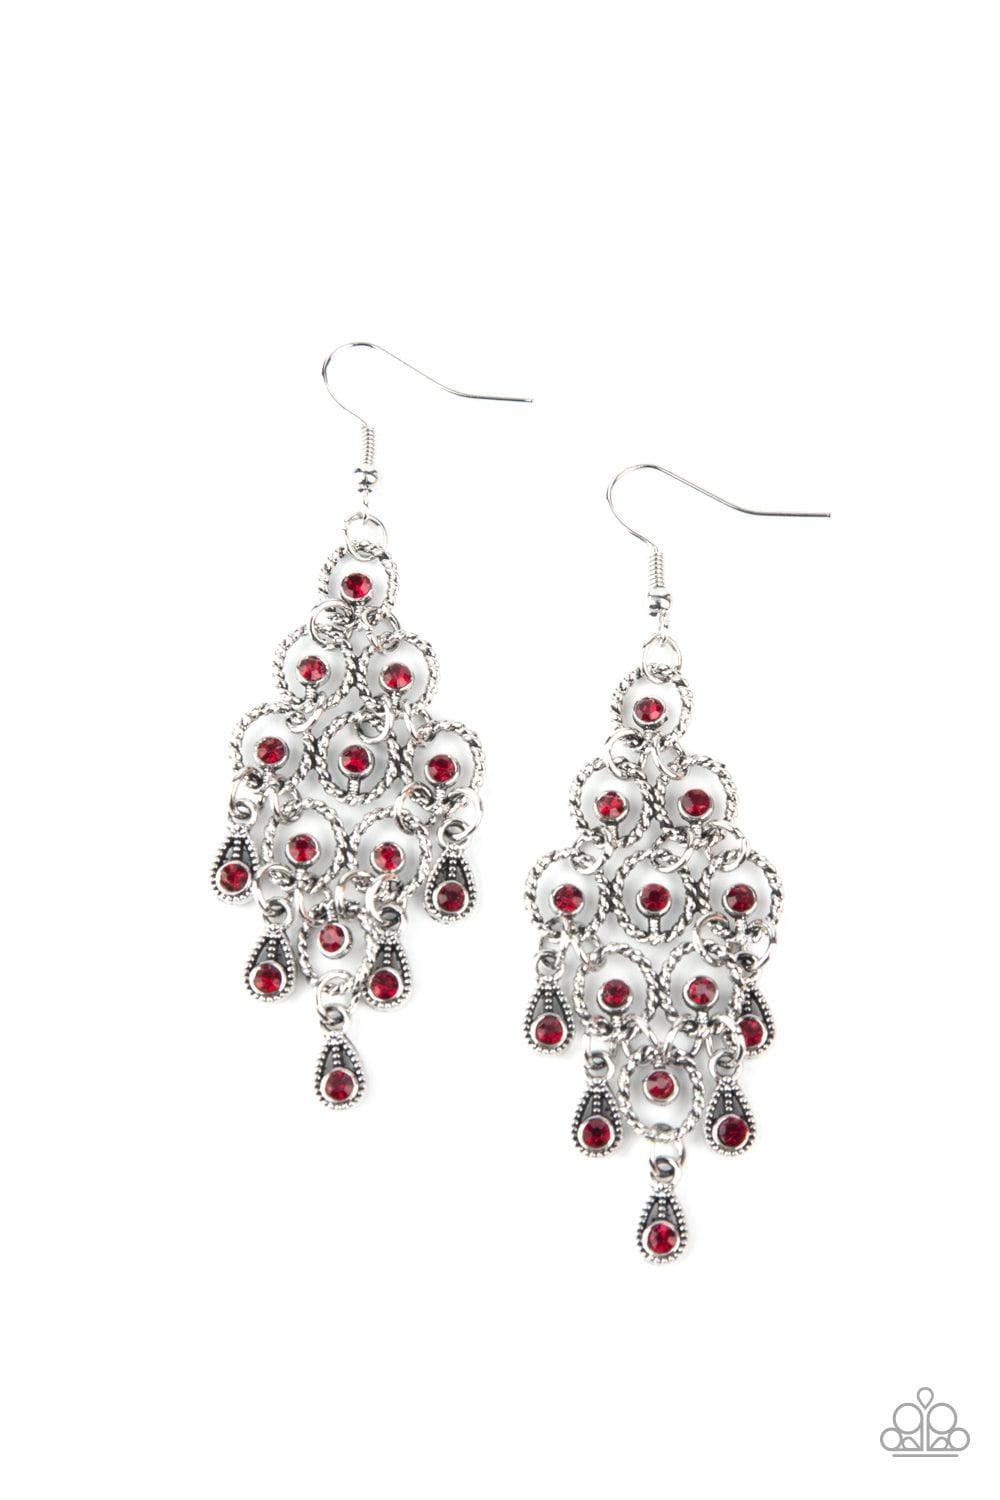 Paparazzi Accessories - Chandelier Cameo - Red Earrings - Bling by JessieK